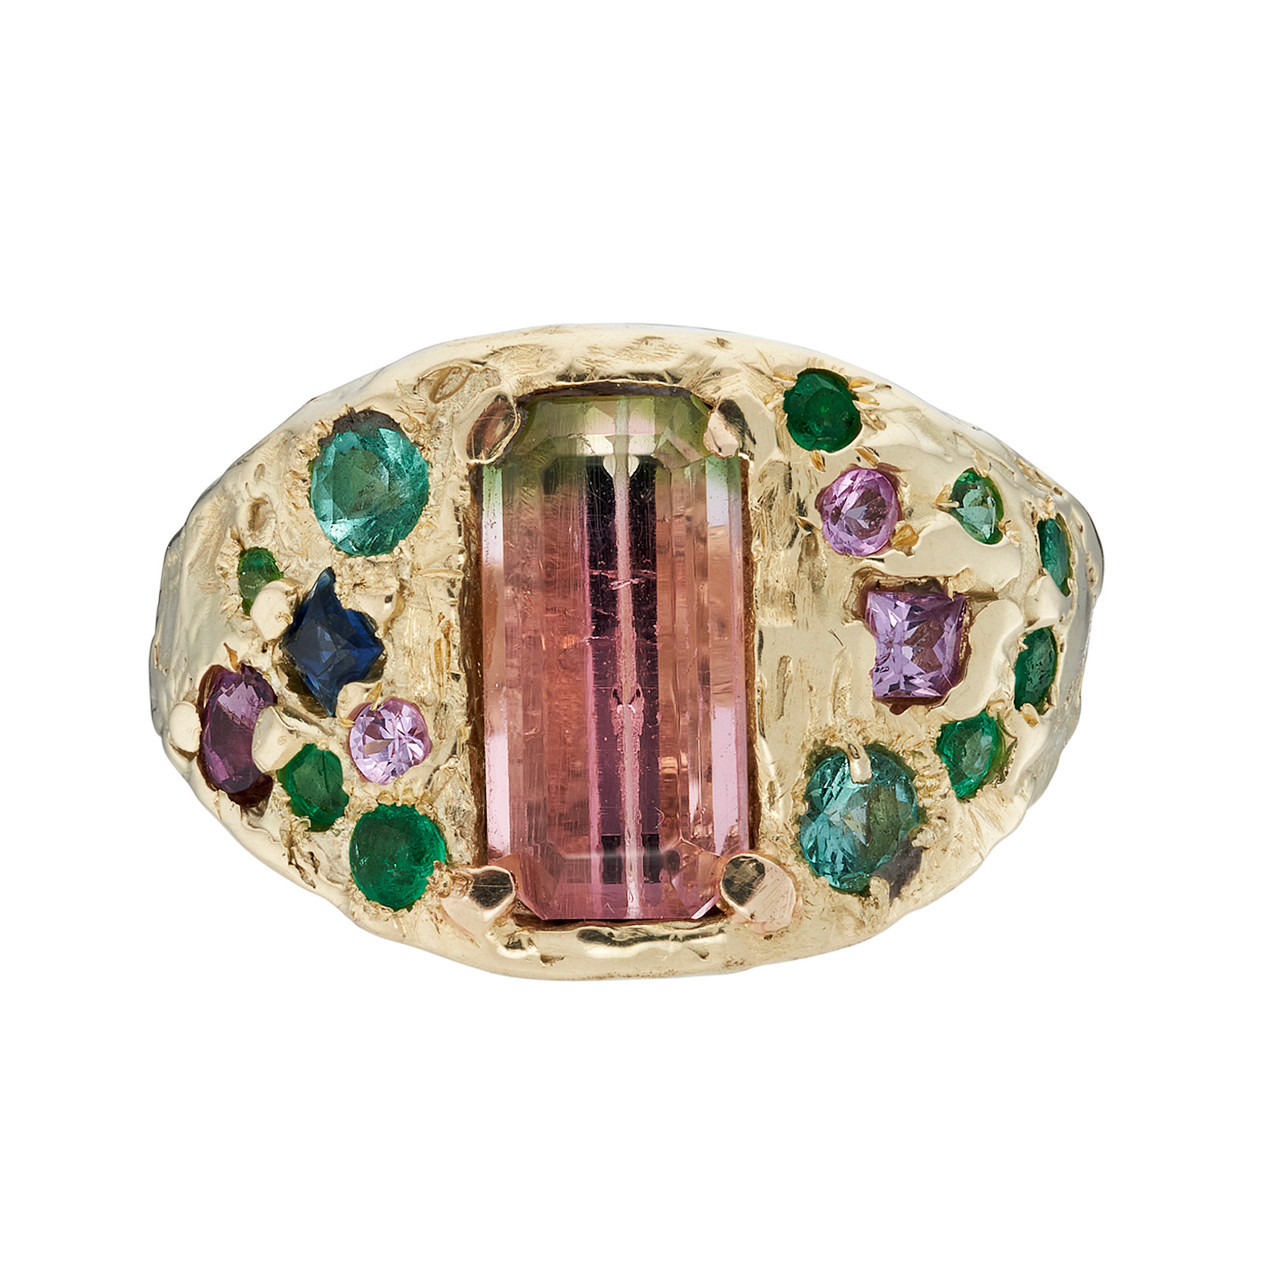 One-Of-A-Kind Watermelon Tourmaline Cocktail Ring, Leto Lama, tomfoolery